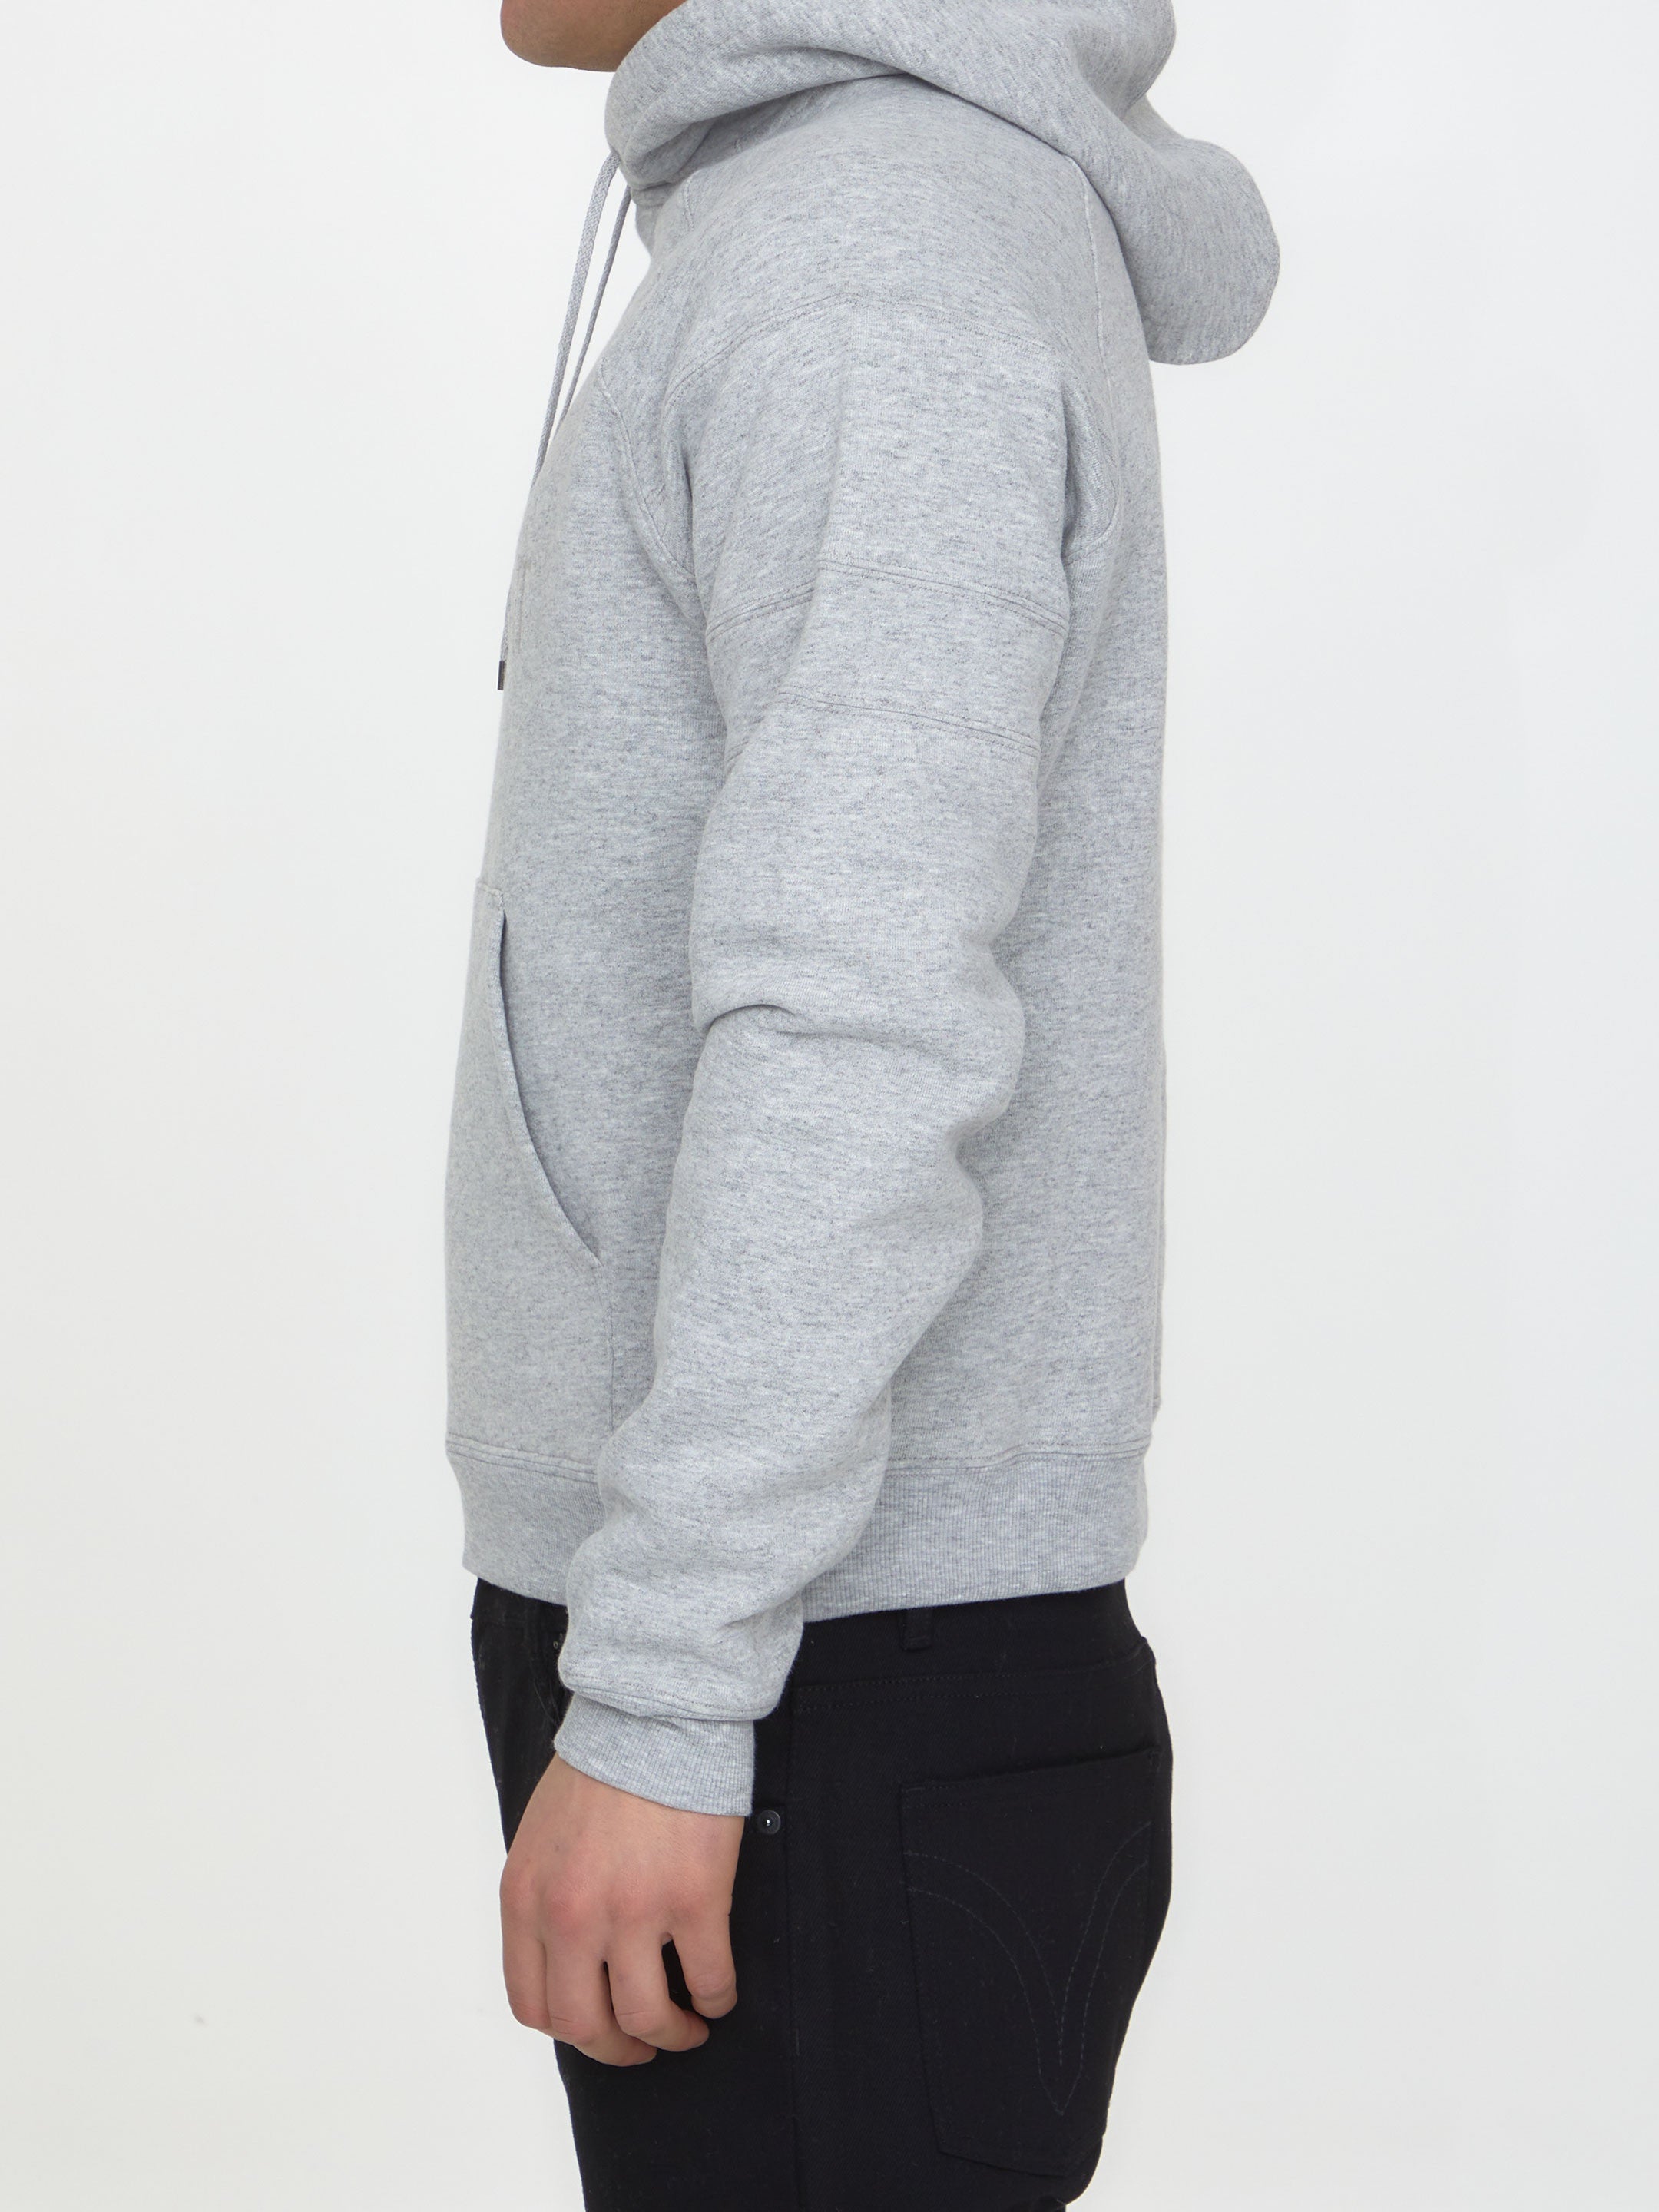 SAINT-LAURENT-OUTLET-SALE-Cotton-hoodie-with-logo-Strick-M-GREY-ARCHIVE-COLLECTION-3.jpg